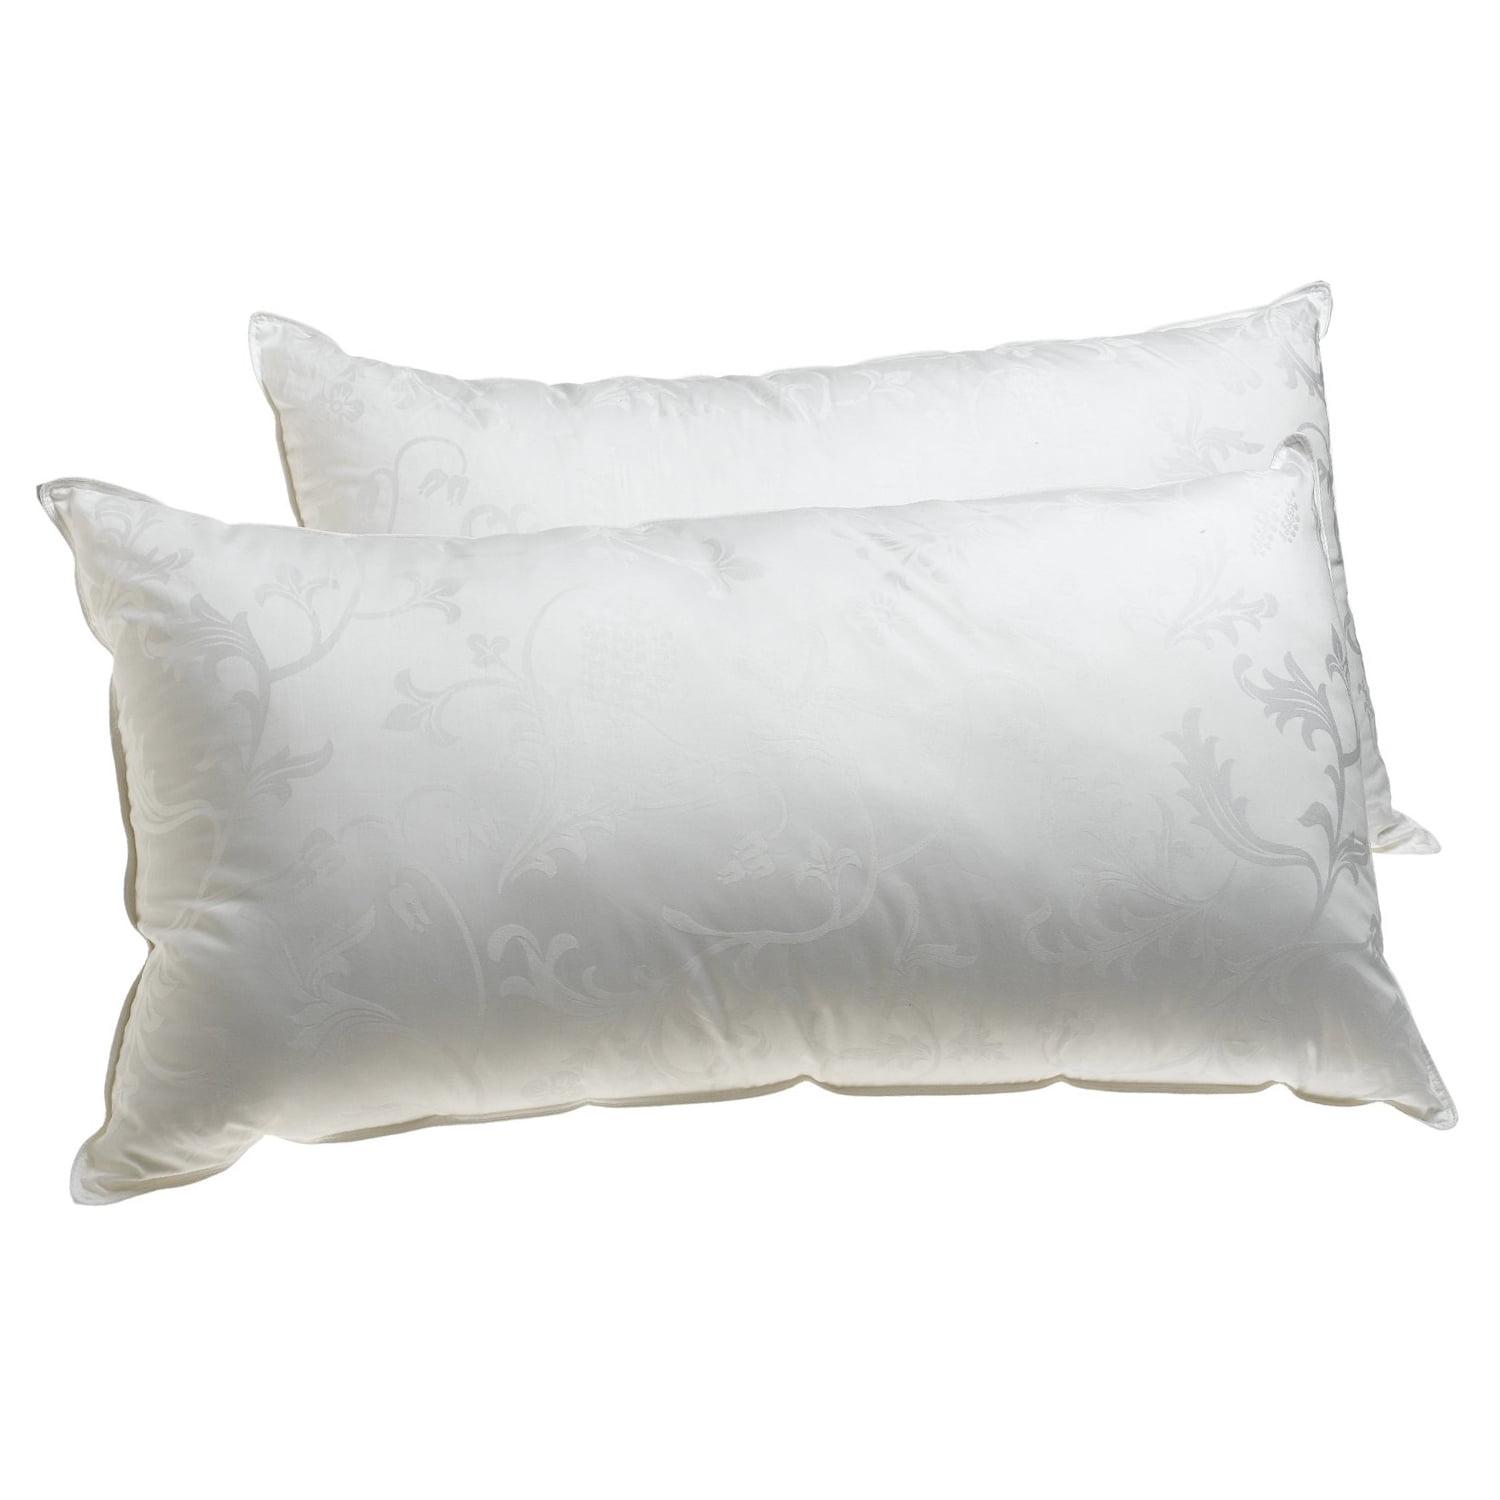 Anti Allergic Pillow Hotel Quality Pack Of 2 Extra Filled Firm Deluxe Pillows 